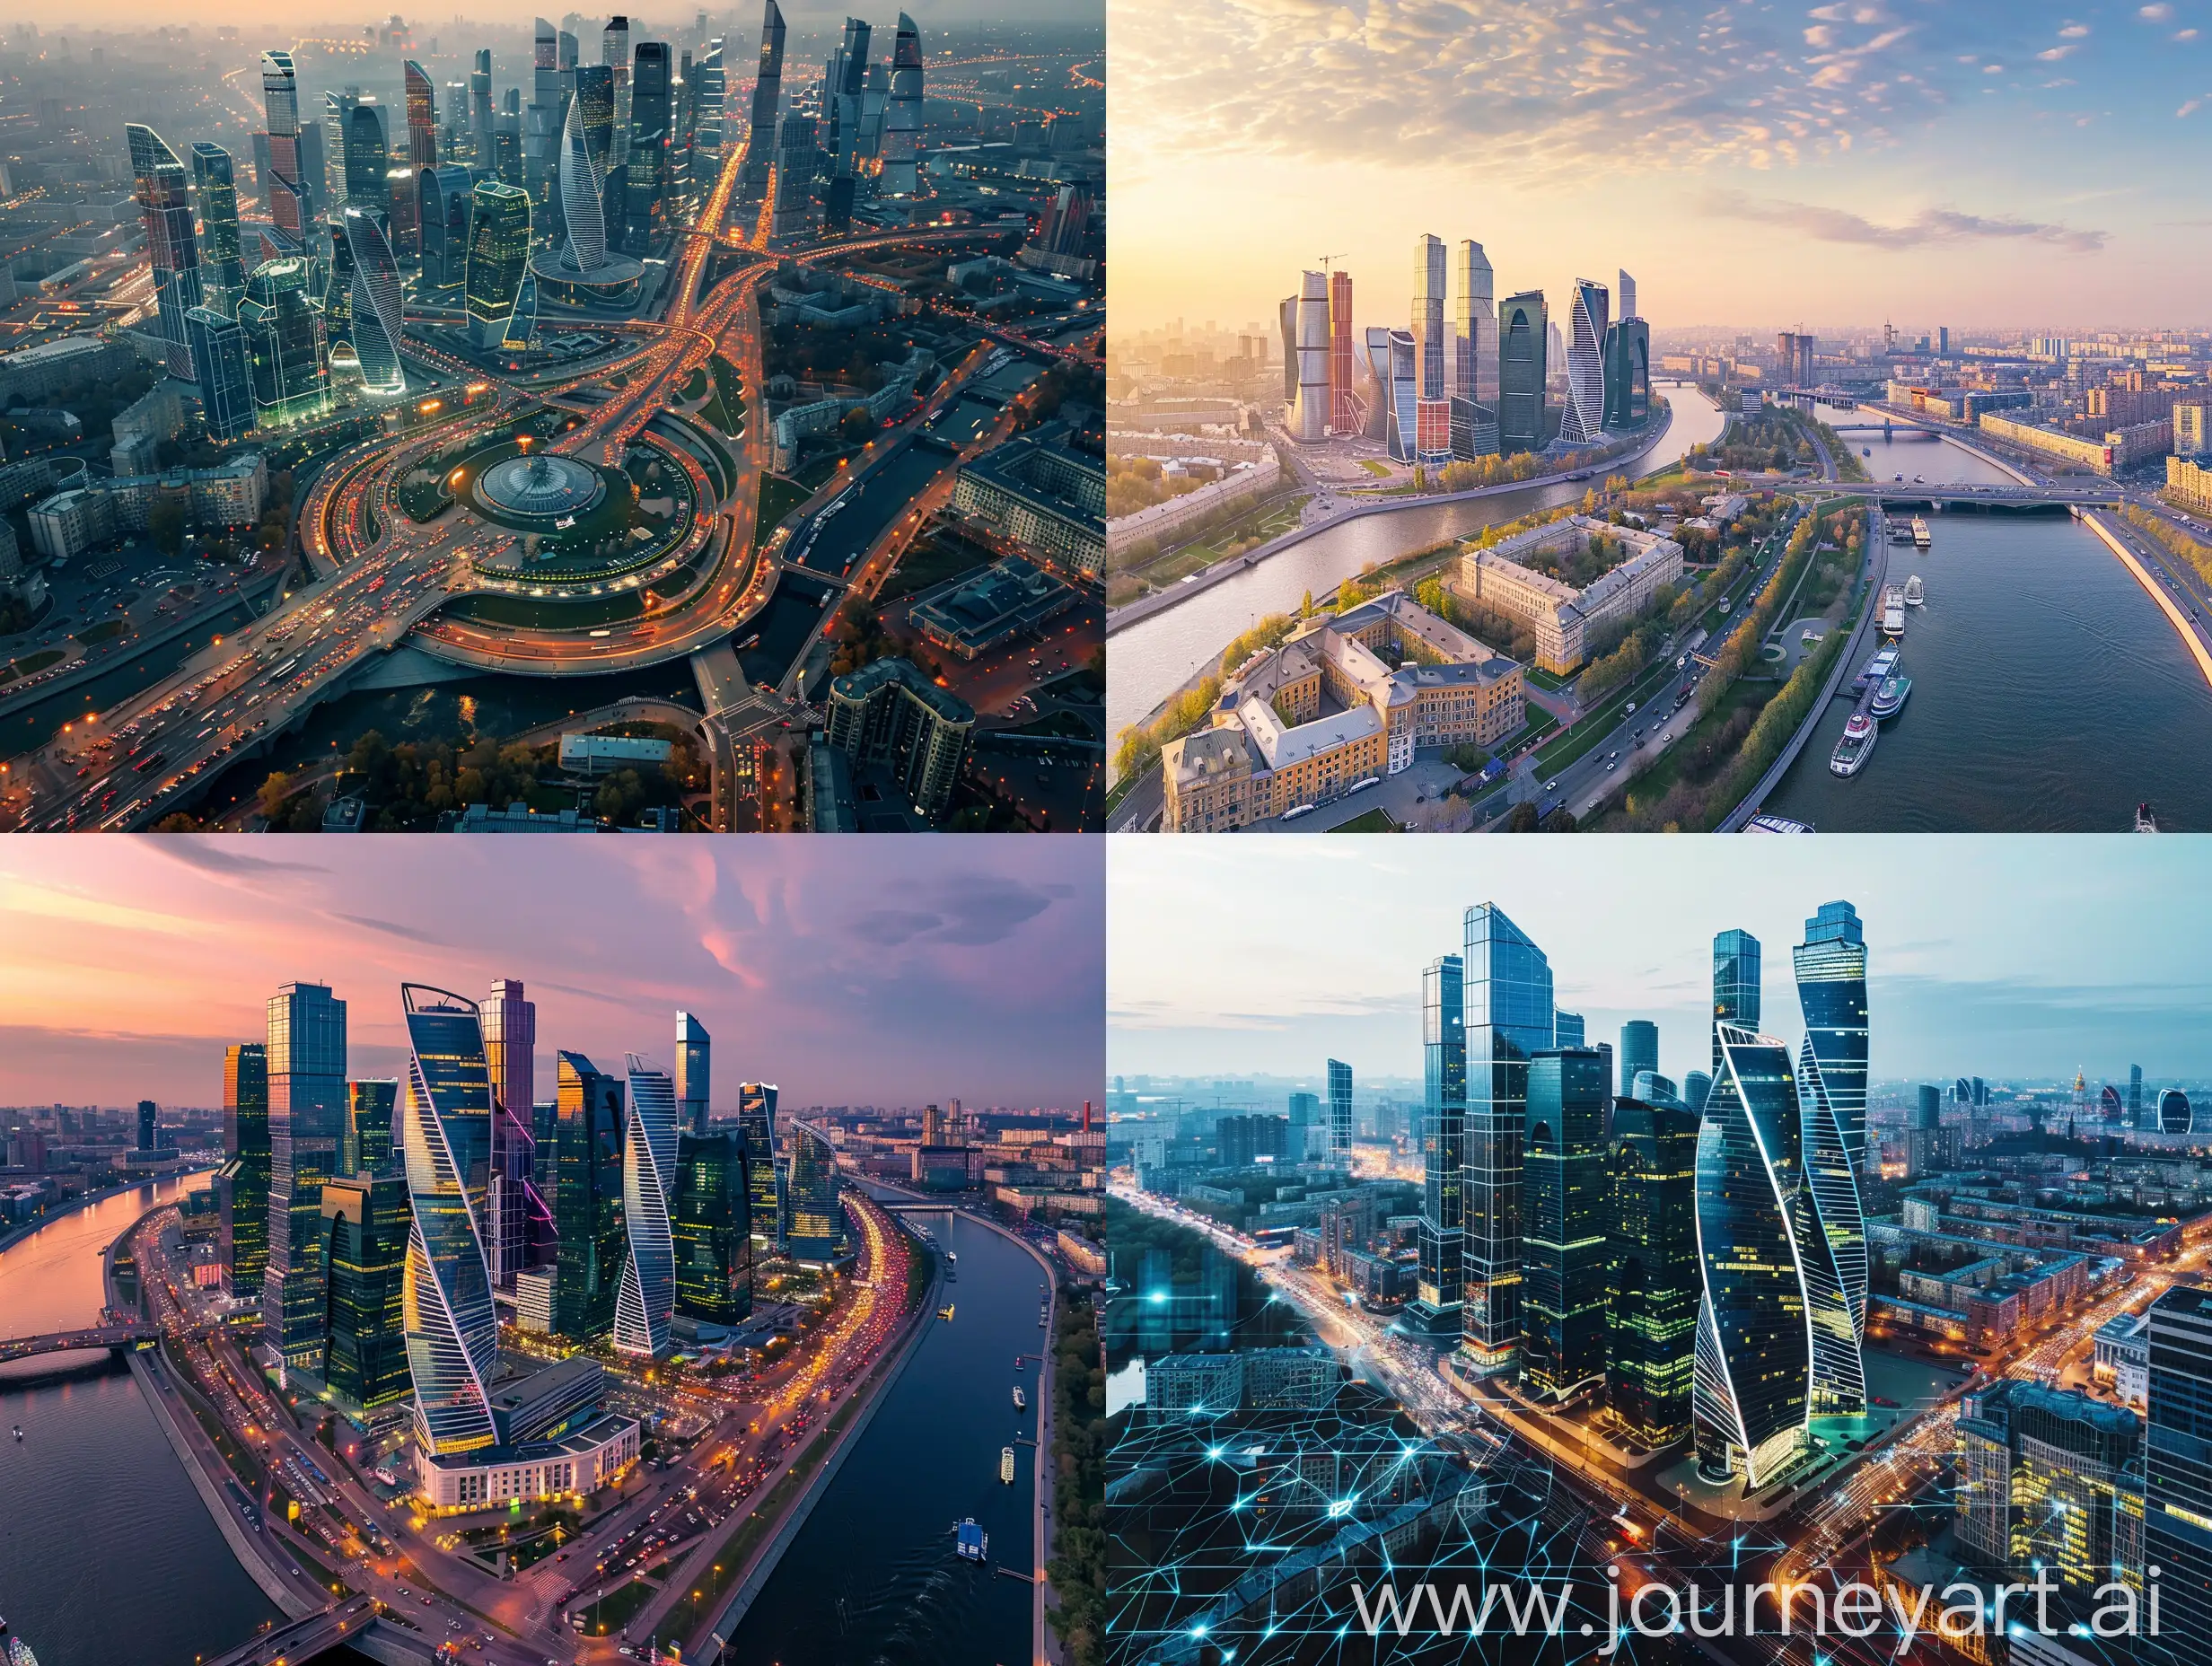 Futuristic-Urban-Landscape-of-Moscow-City-from-Aerial-Drone-View